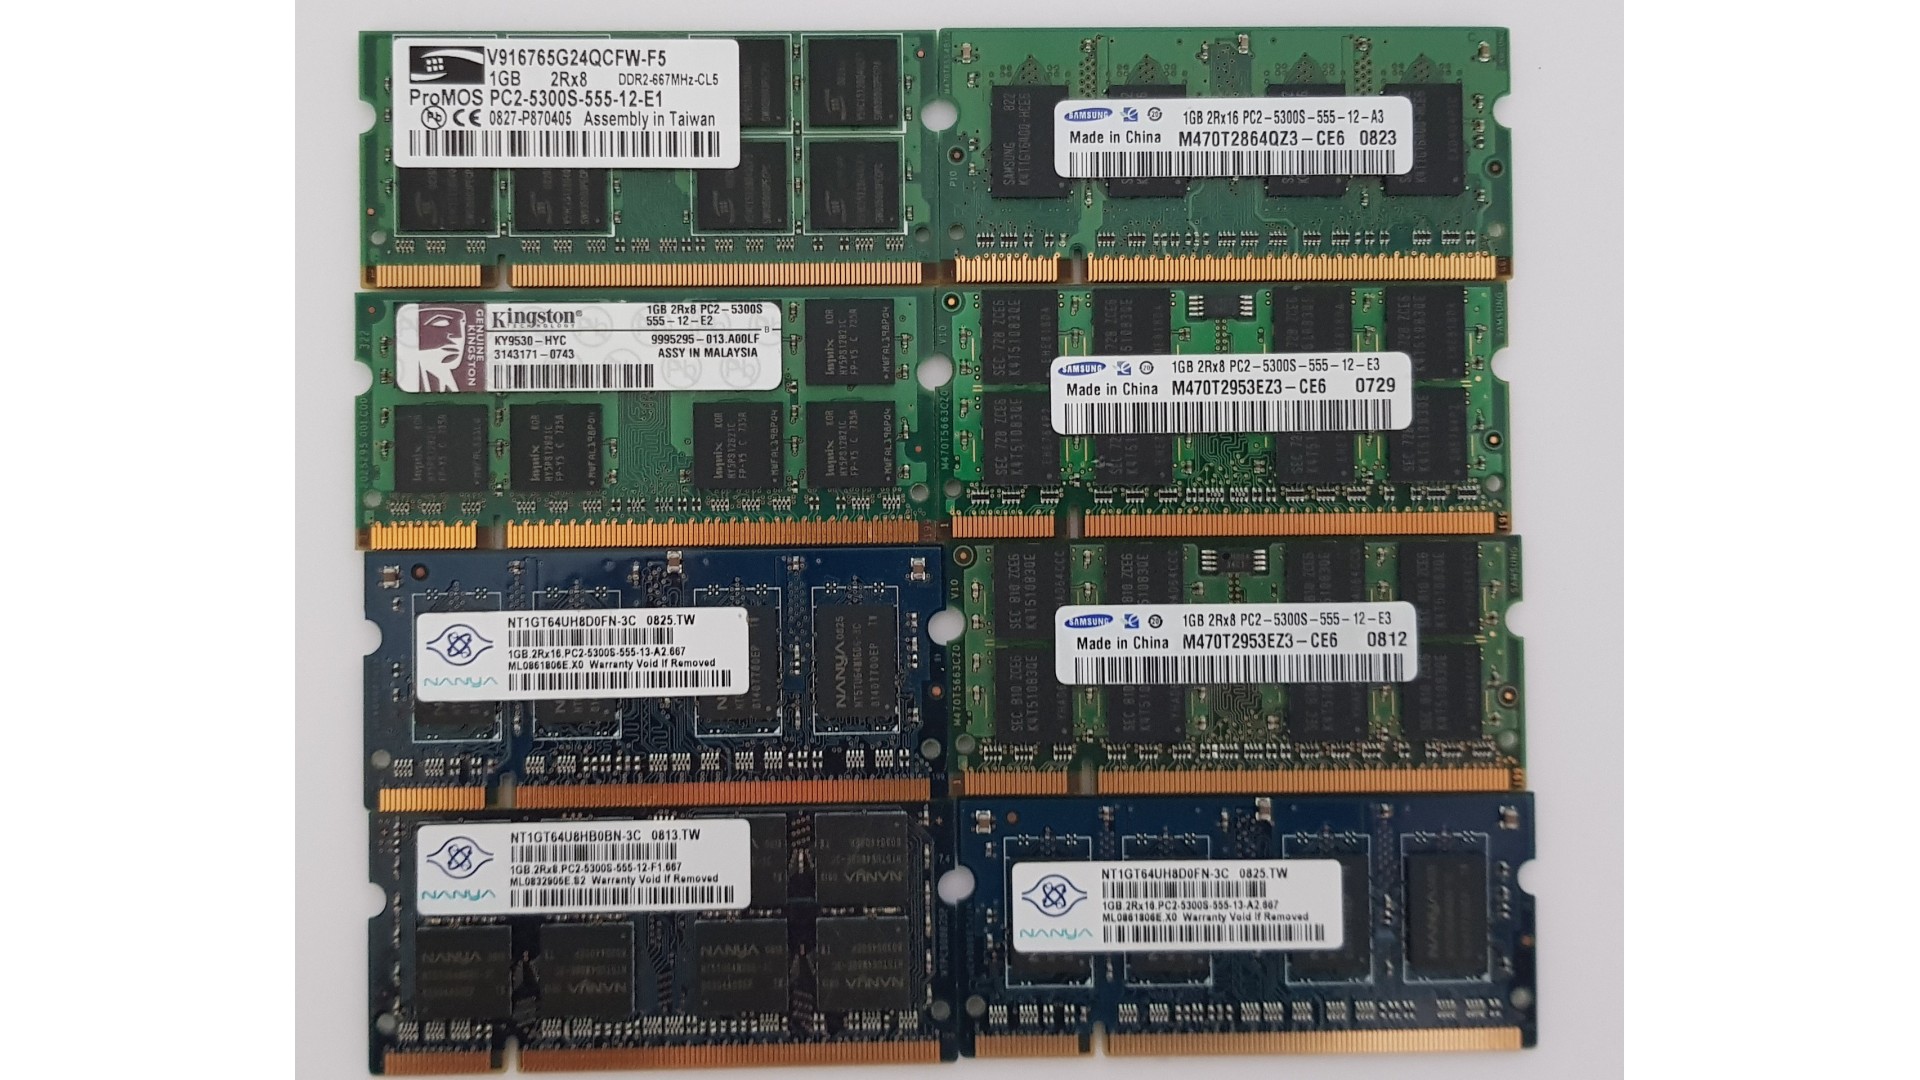 1GB DDR2 SO-DIMM PC2-5300 Mixed